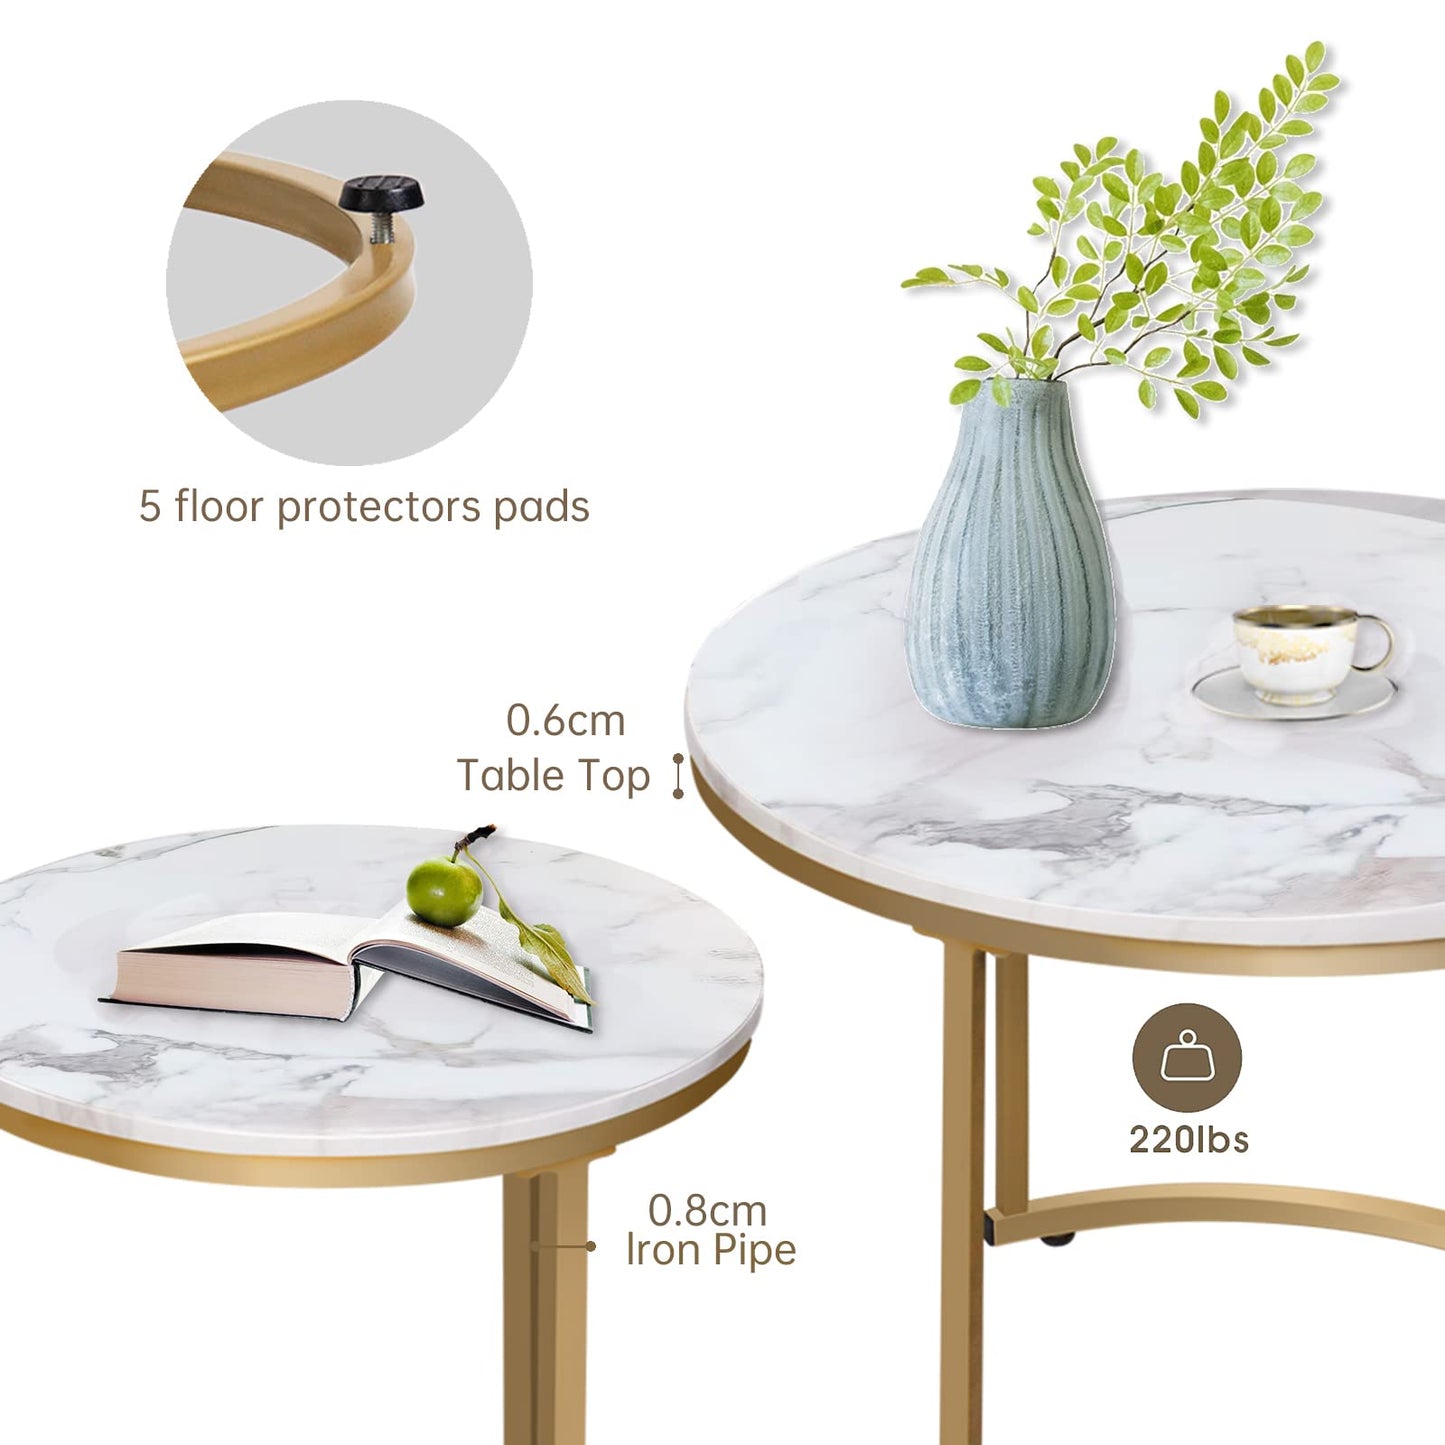 aboxoo Coffee Table Nesting White Set of 2 Side Set Golden Frame Circular and Marble Pattern Wooden Tables, Living Room Bedroom Apartment Modern Industrial Simple Nightstand